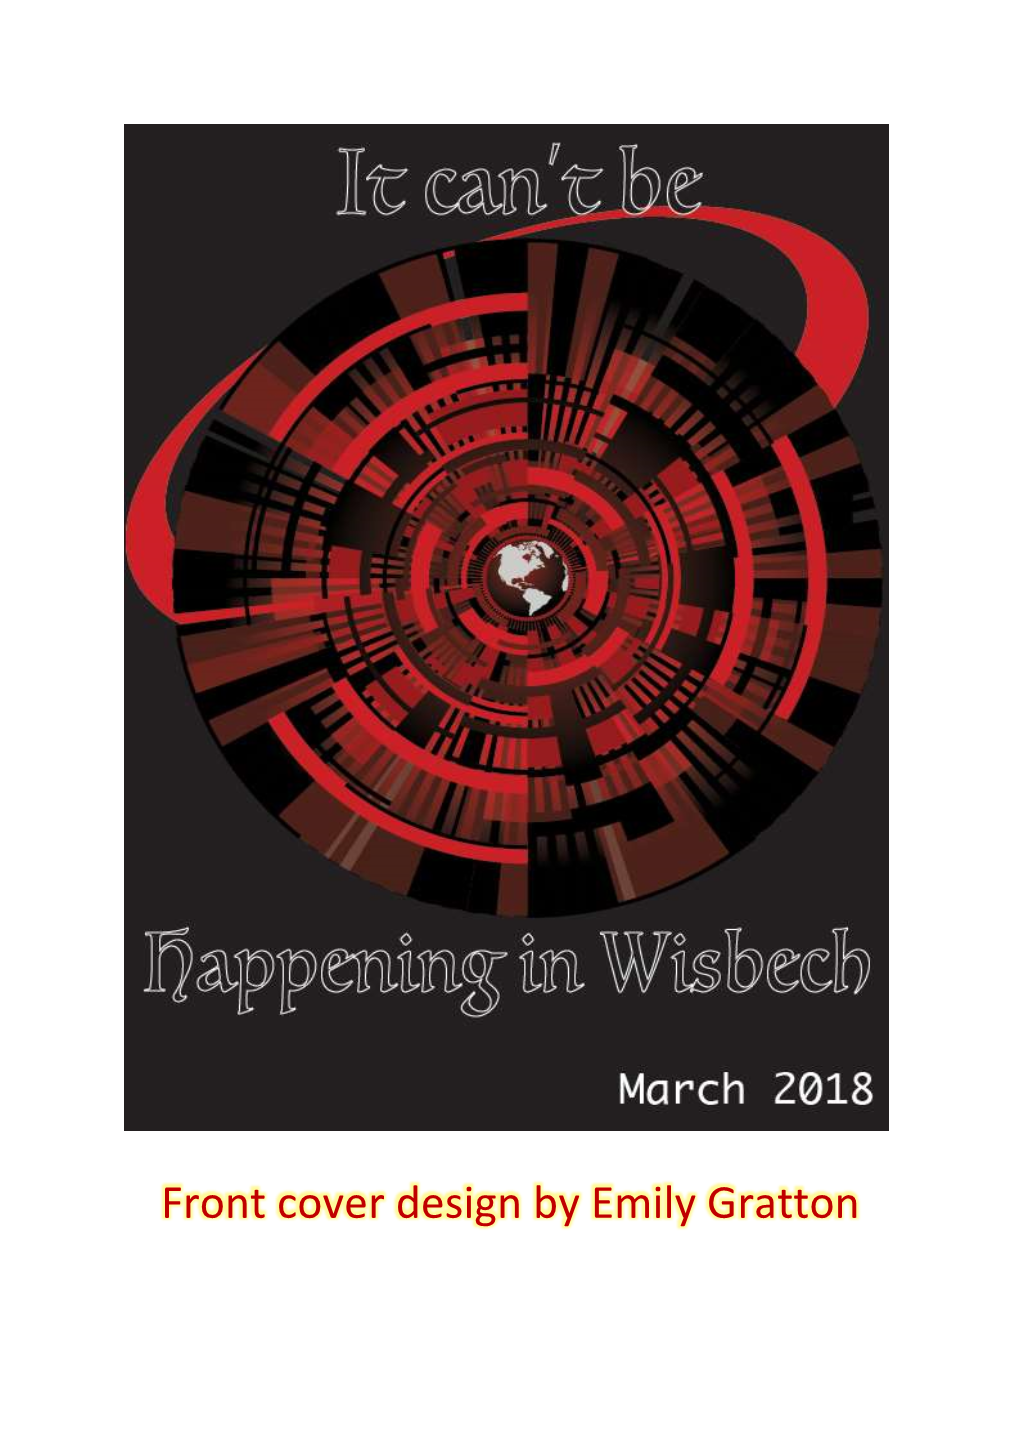 Front Cover Design by Emily Gratton